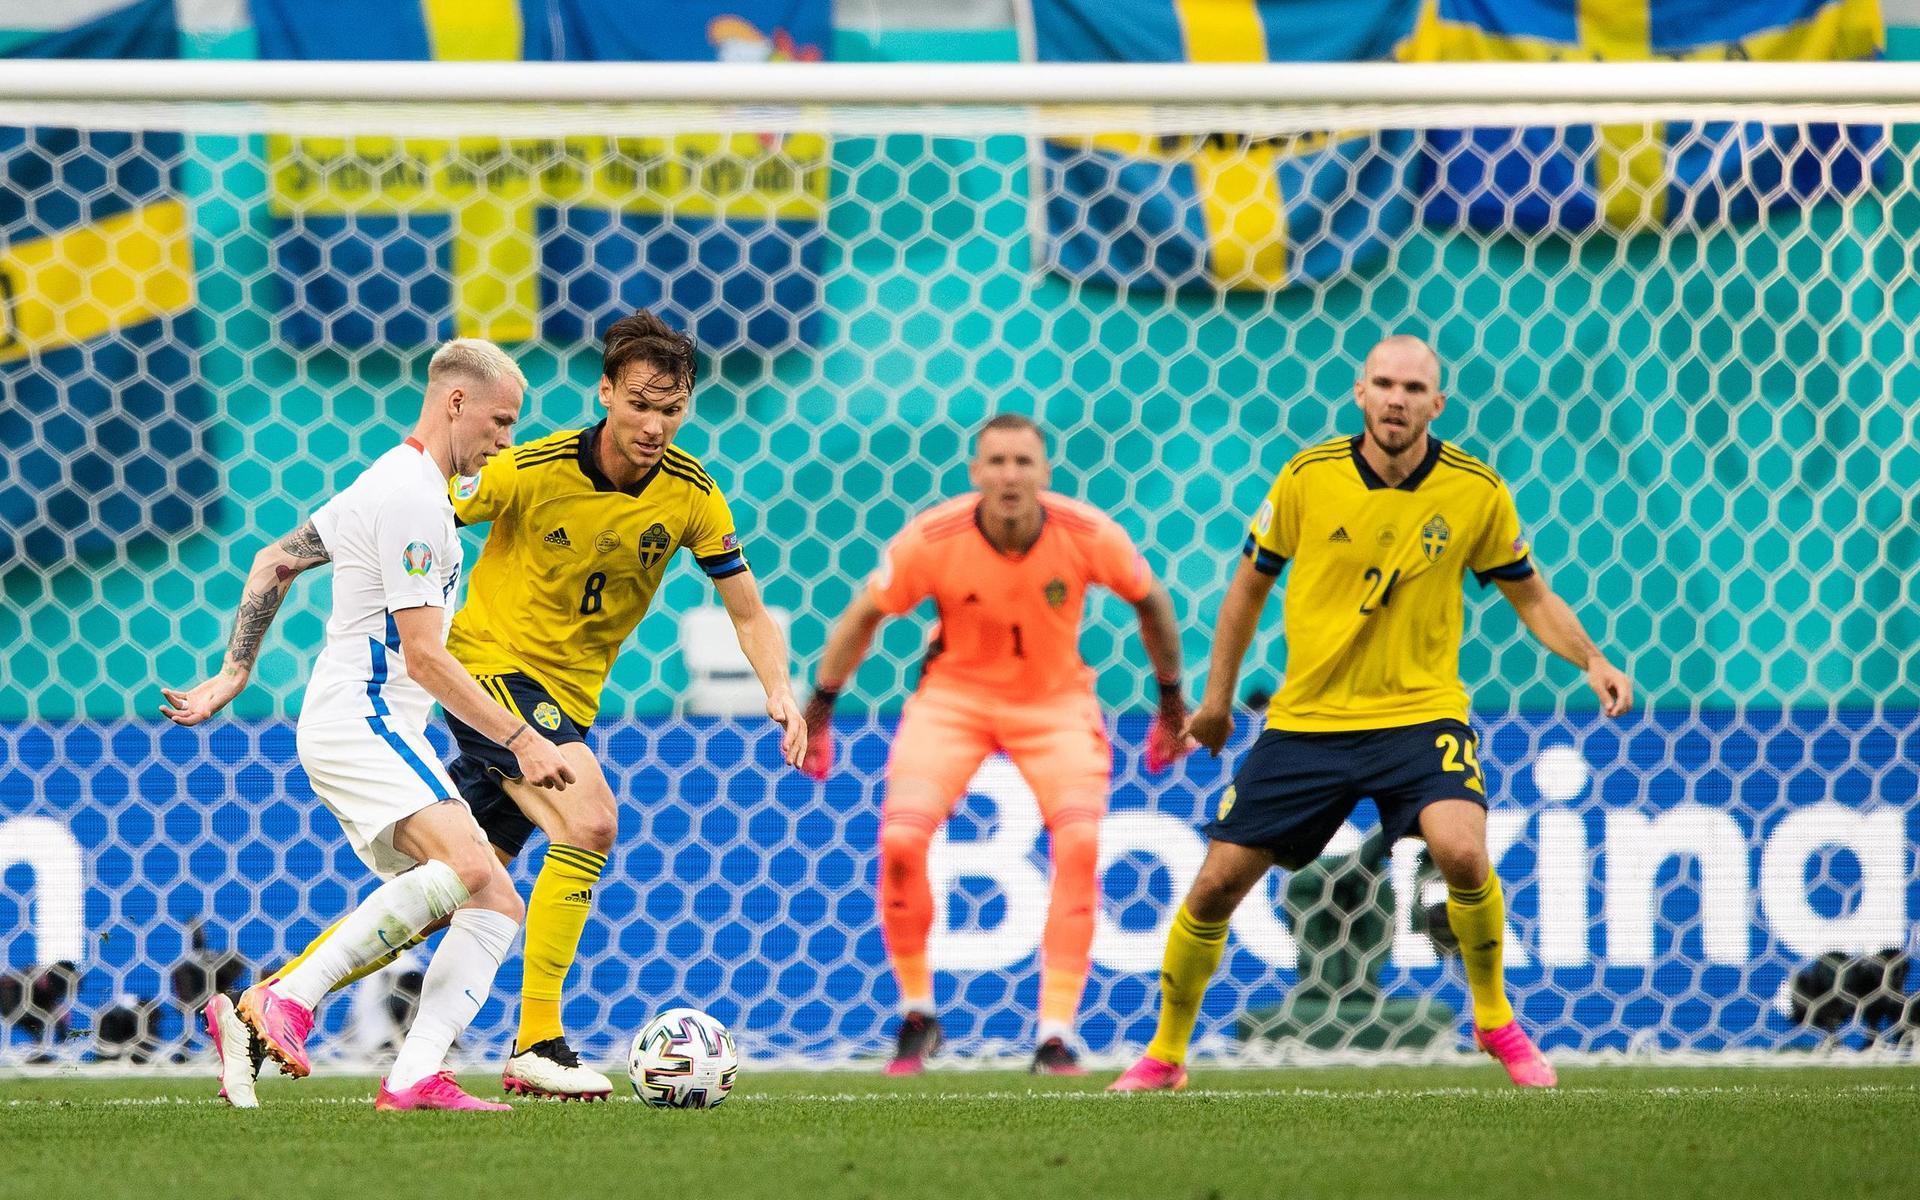 Ondrej Duda of Slovakia against Albin Ekdal and Marcus Danielson of Sweden during the UEFA Euro 2020 Football Championship match between Sweden and Slovakia on June 18, 2021 in Saint Petersburg. 